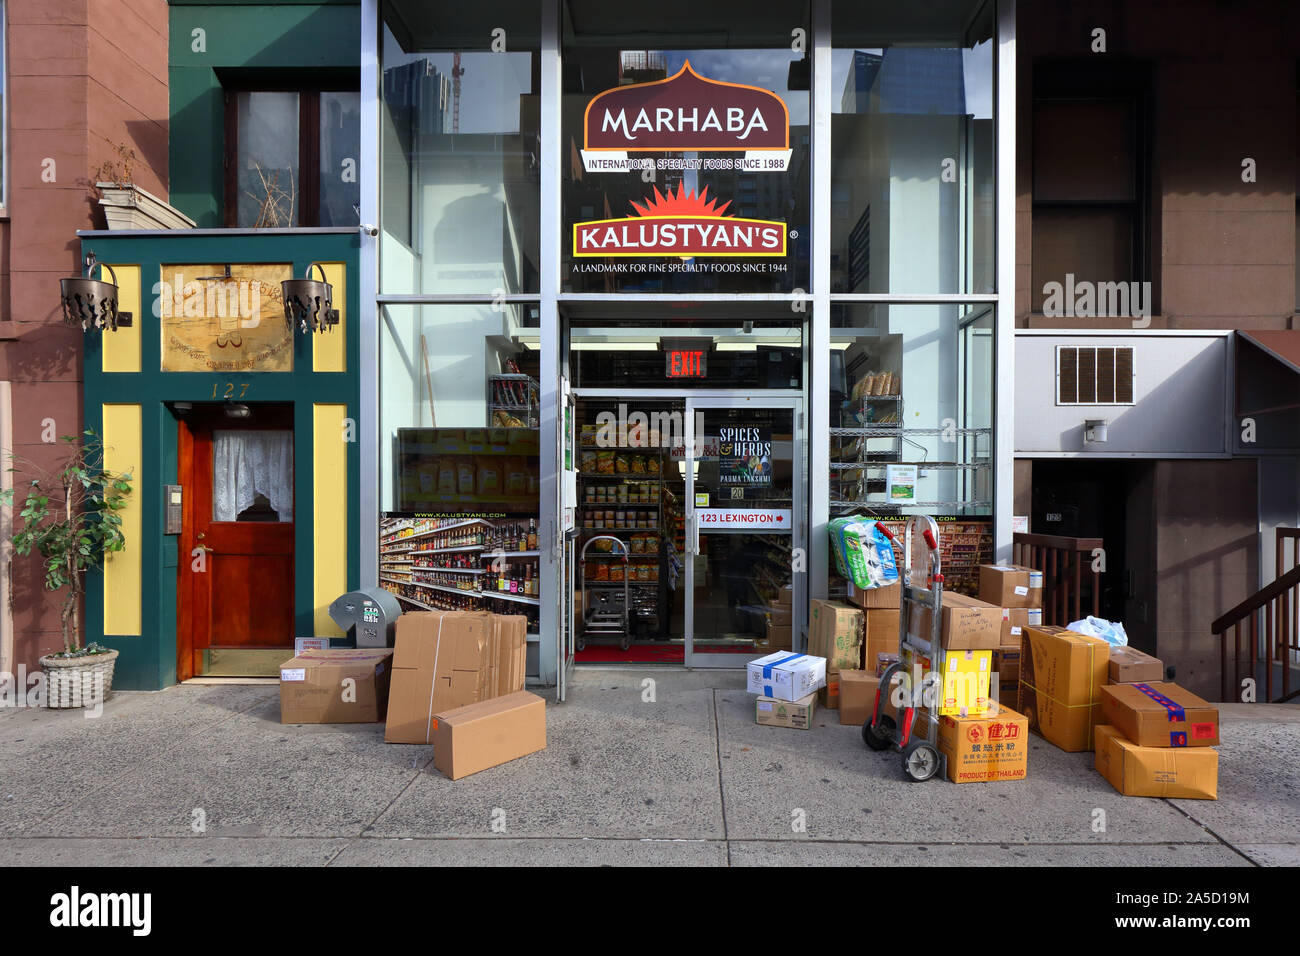 Kalustyan's retail store exit at 127 Lexington Ave, New York, NY.  exterior storefront of a specialty food market in the Curry Hill area of Manhattan. Stock Photo